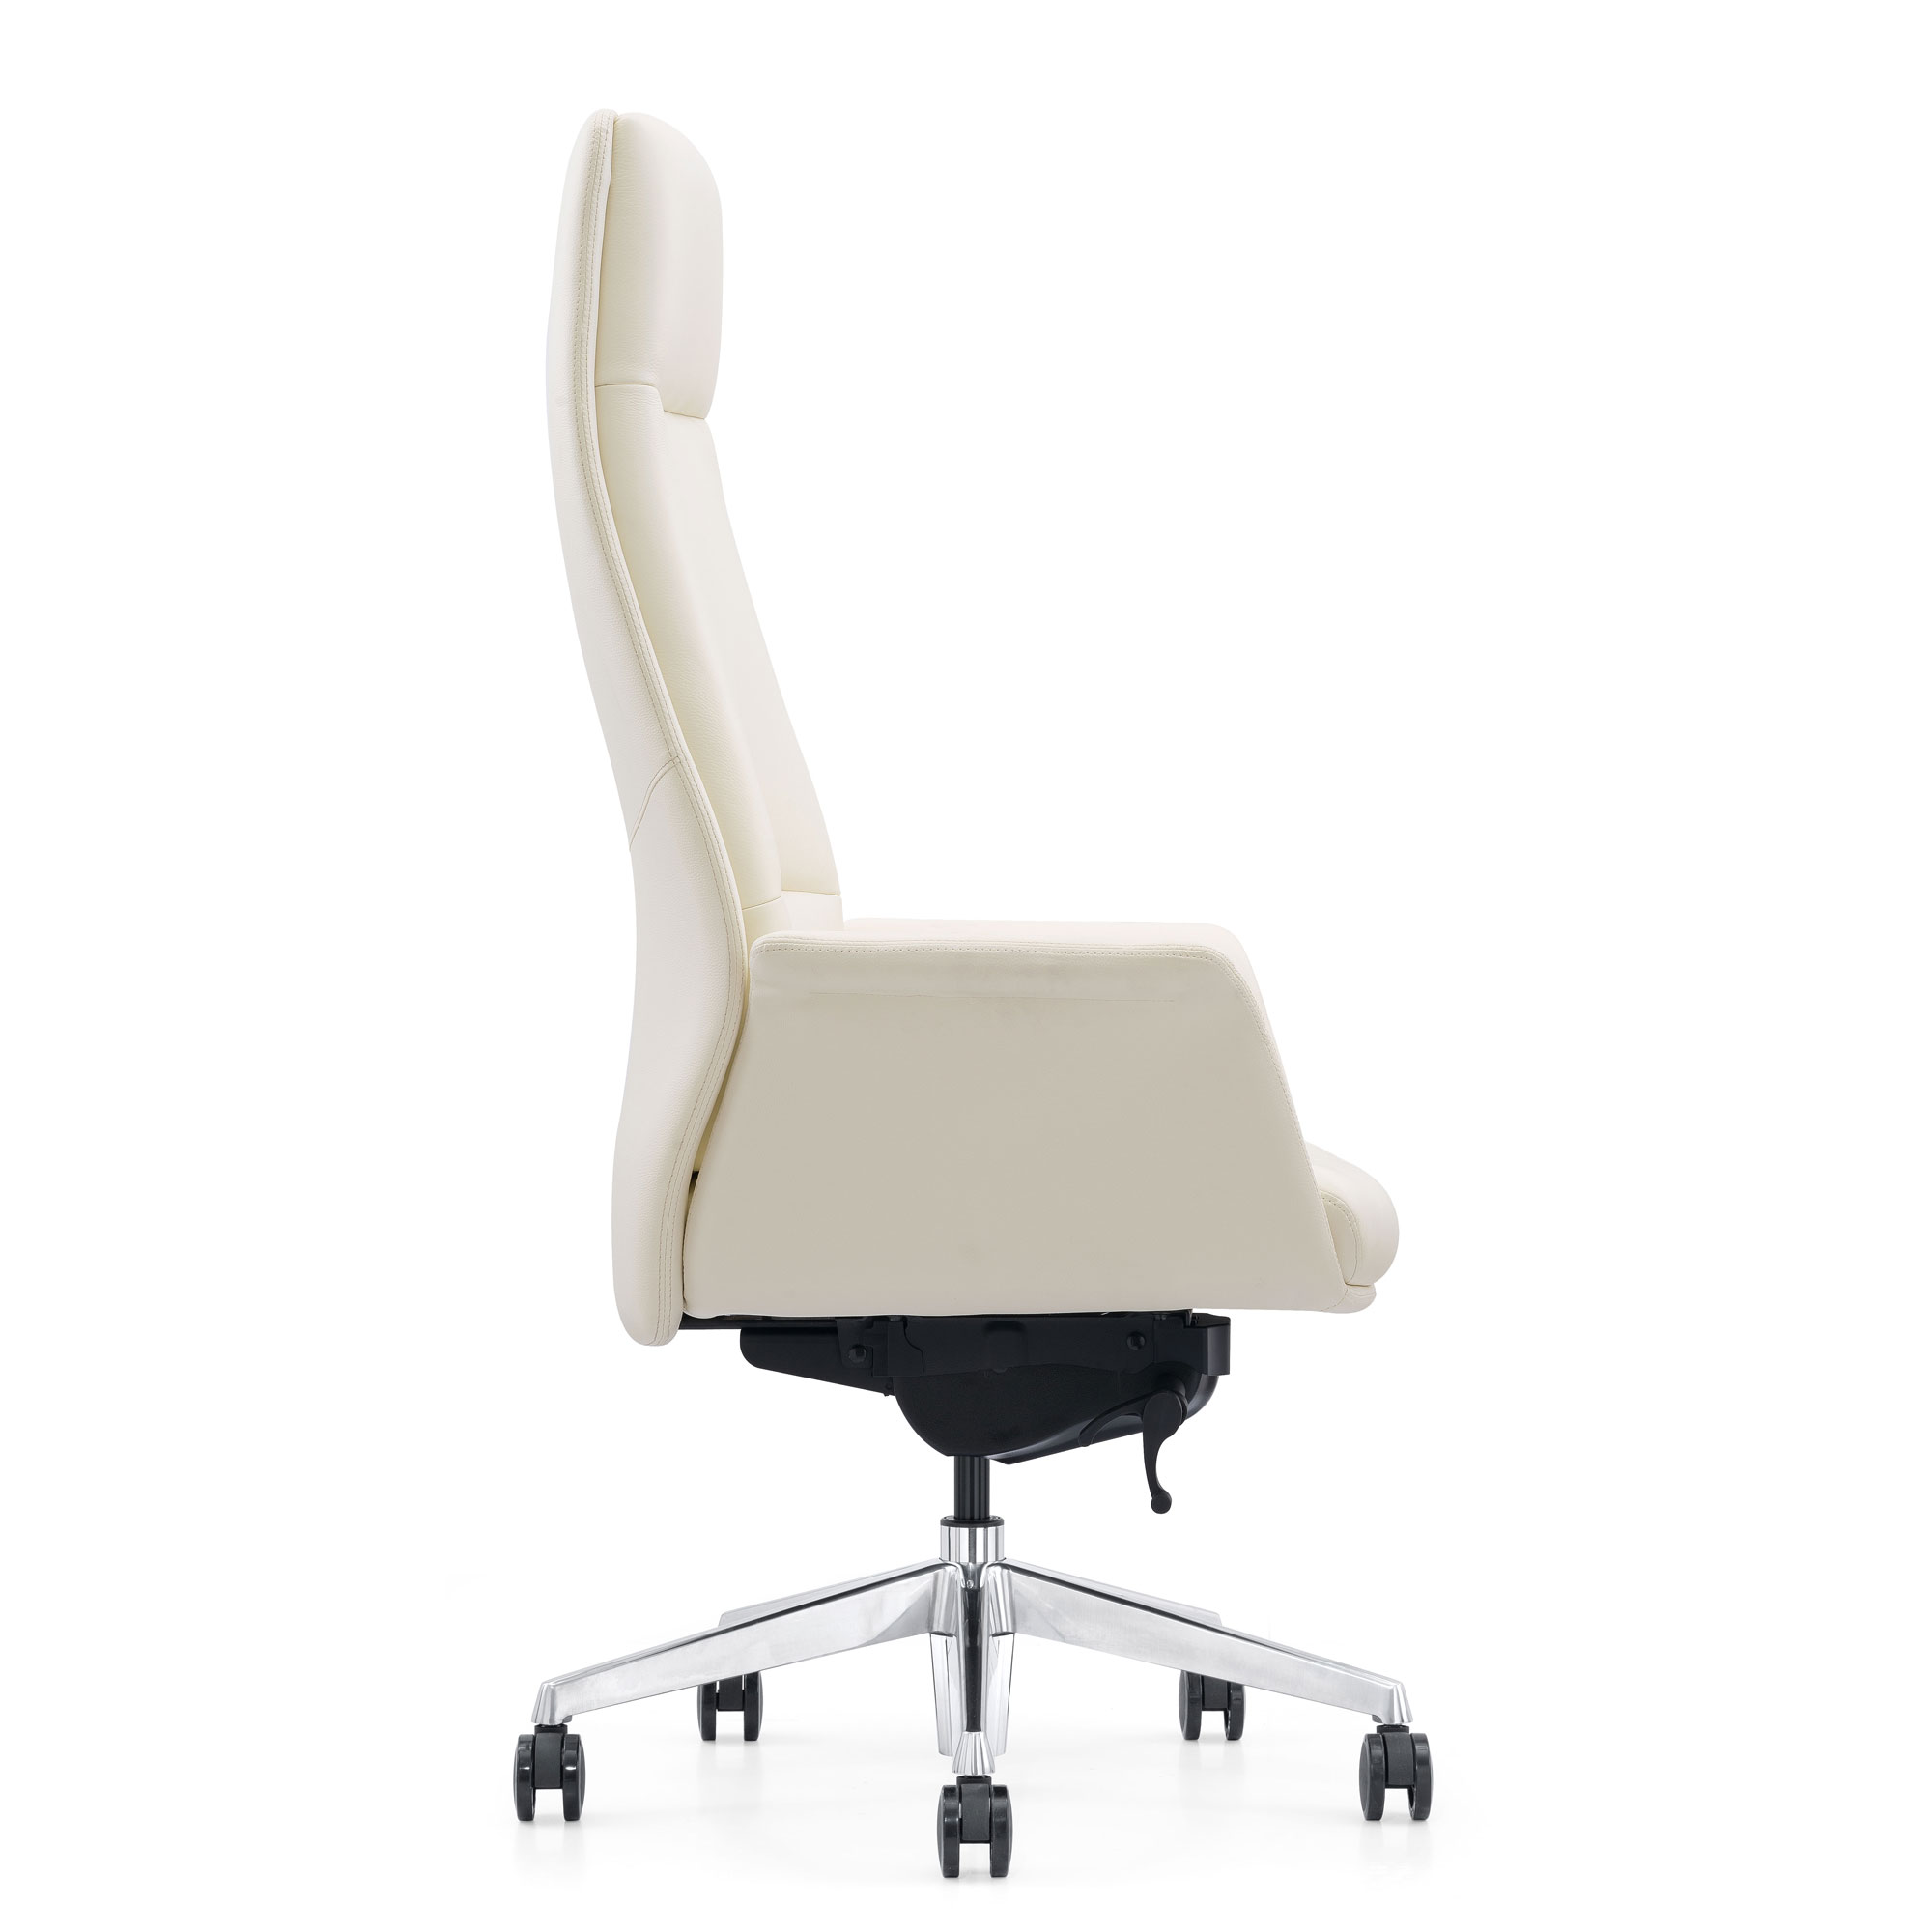 Home Office Executive Chair - Buzz Seating Online